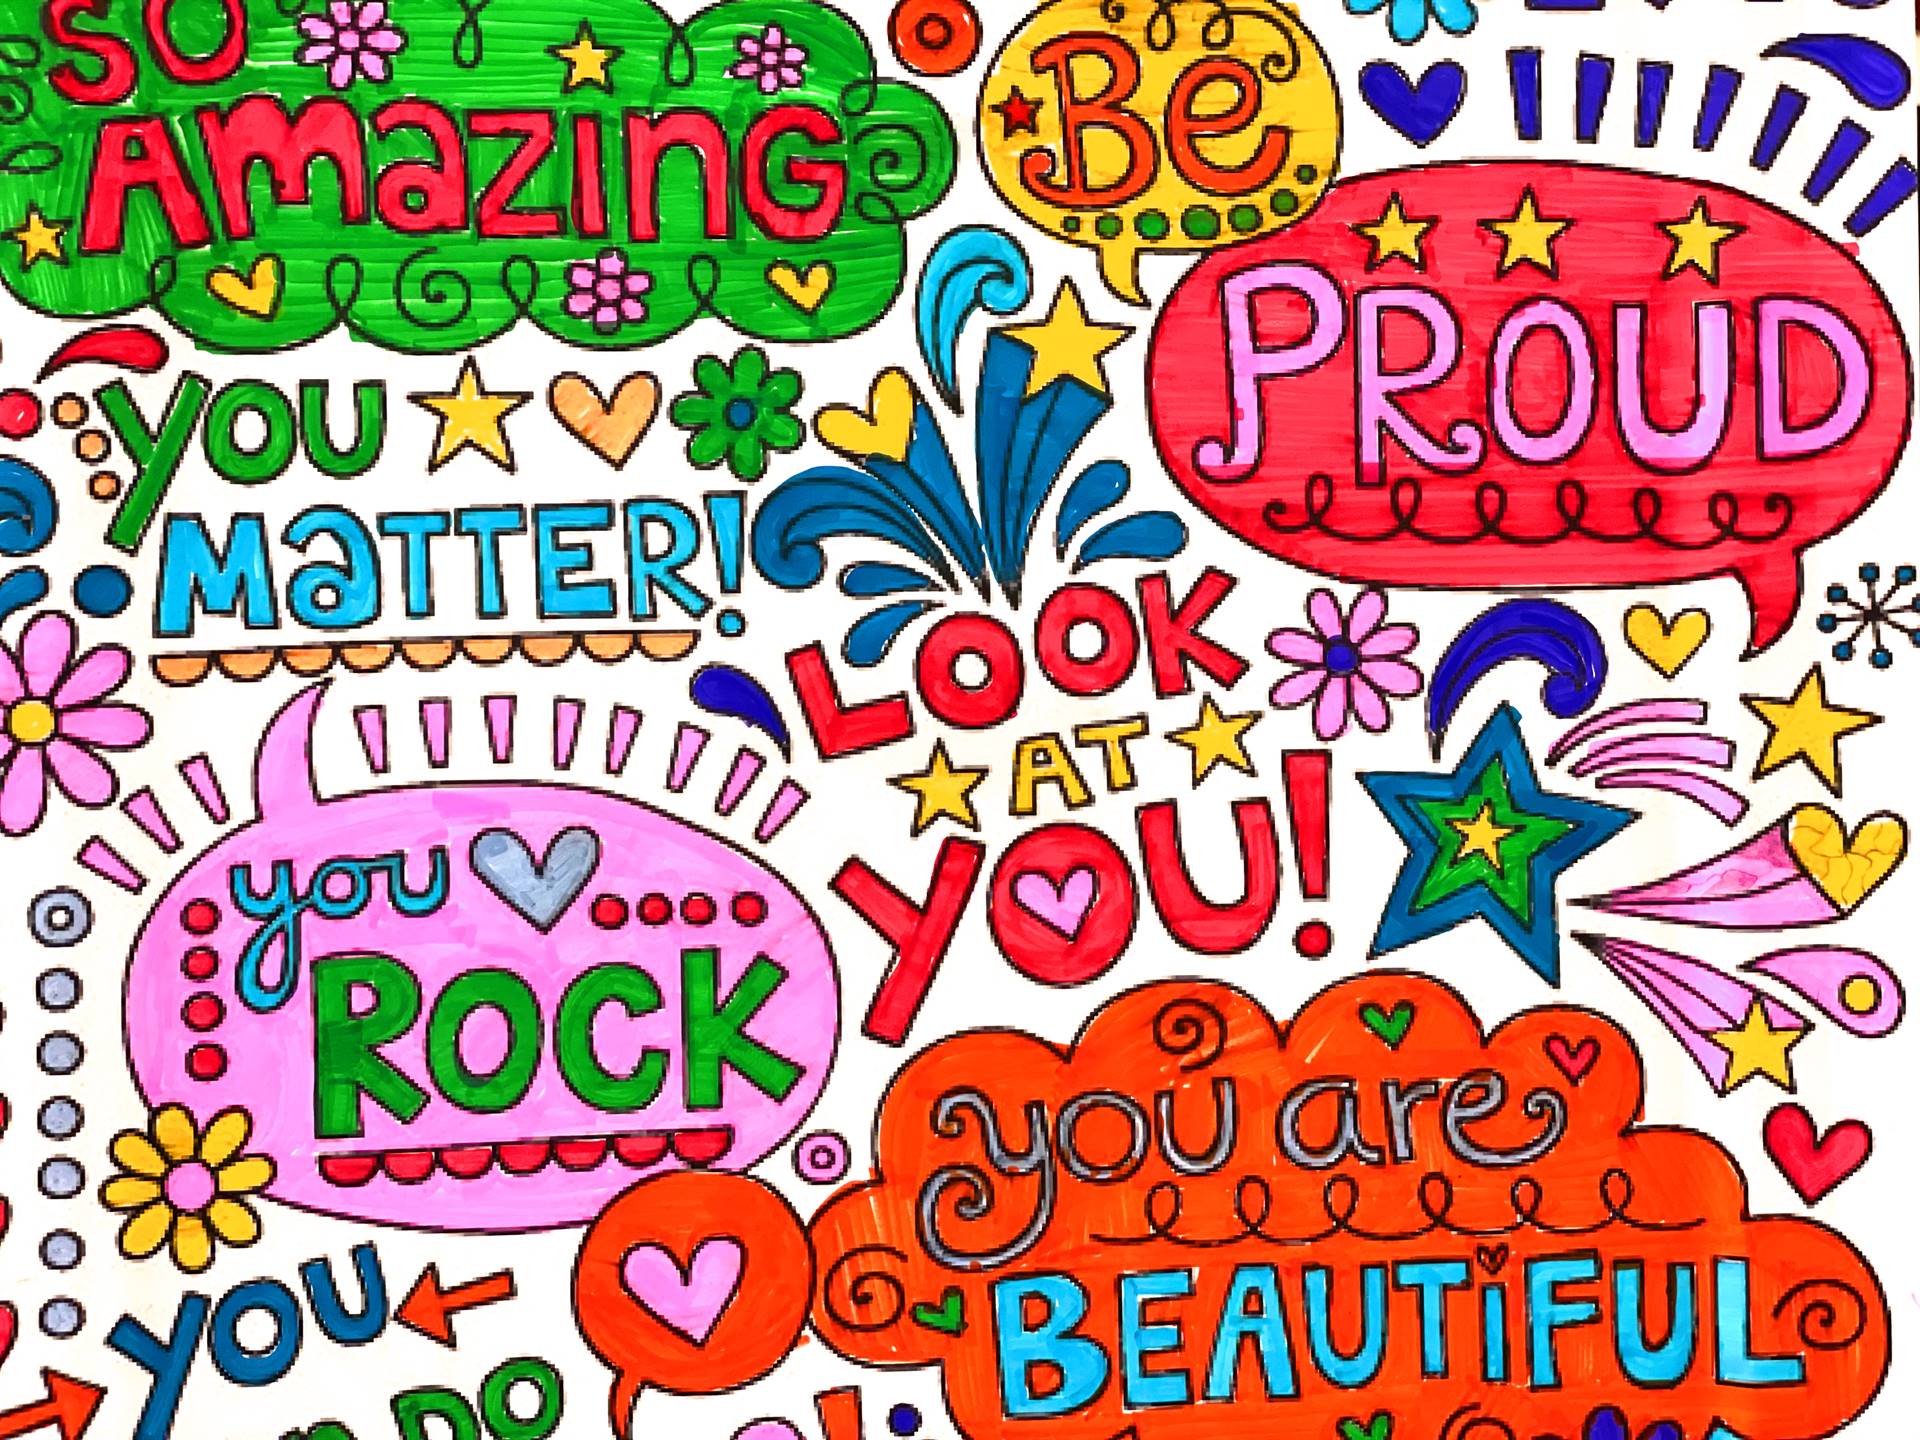 Colorful image of words of affirmation